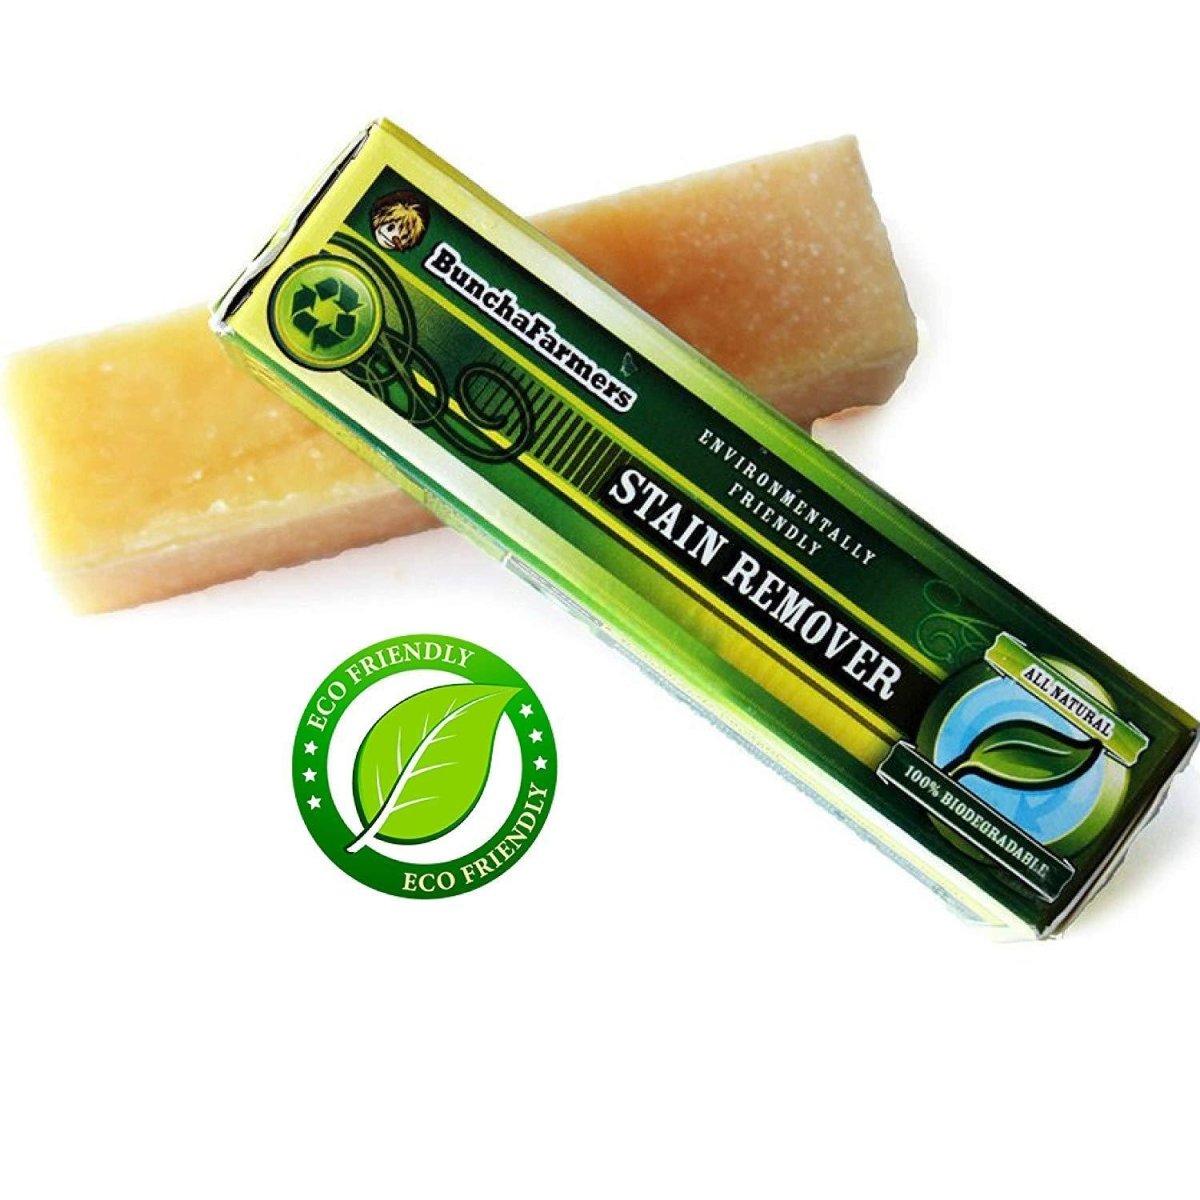 Buncha Farmers All Natural Stain Remover Stick - Baby Carrier AccessoriesLittle Zen One4147712436